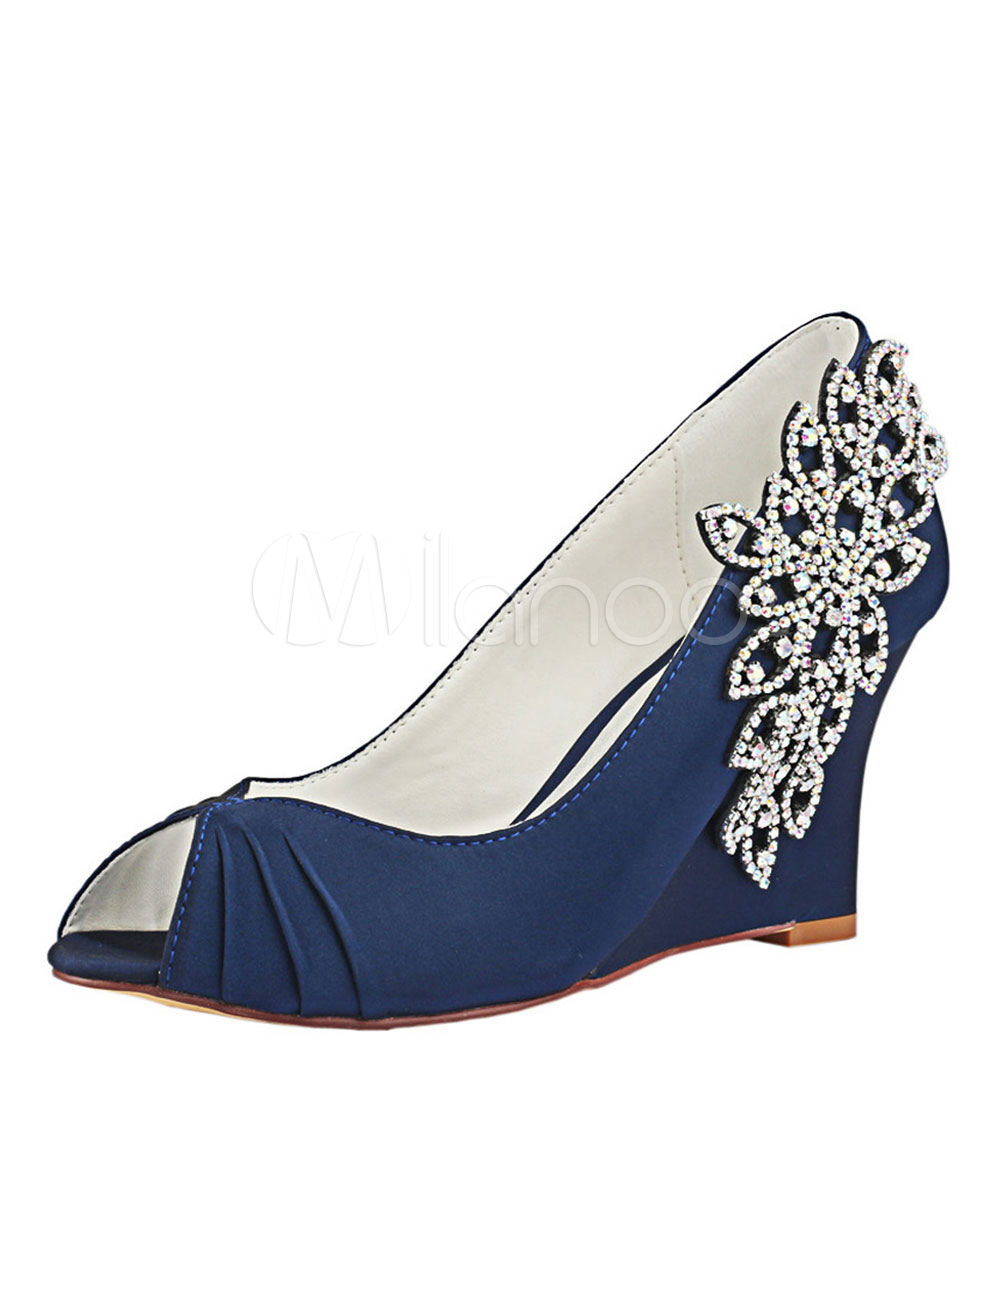 blue shoes for wedding guest